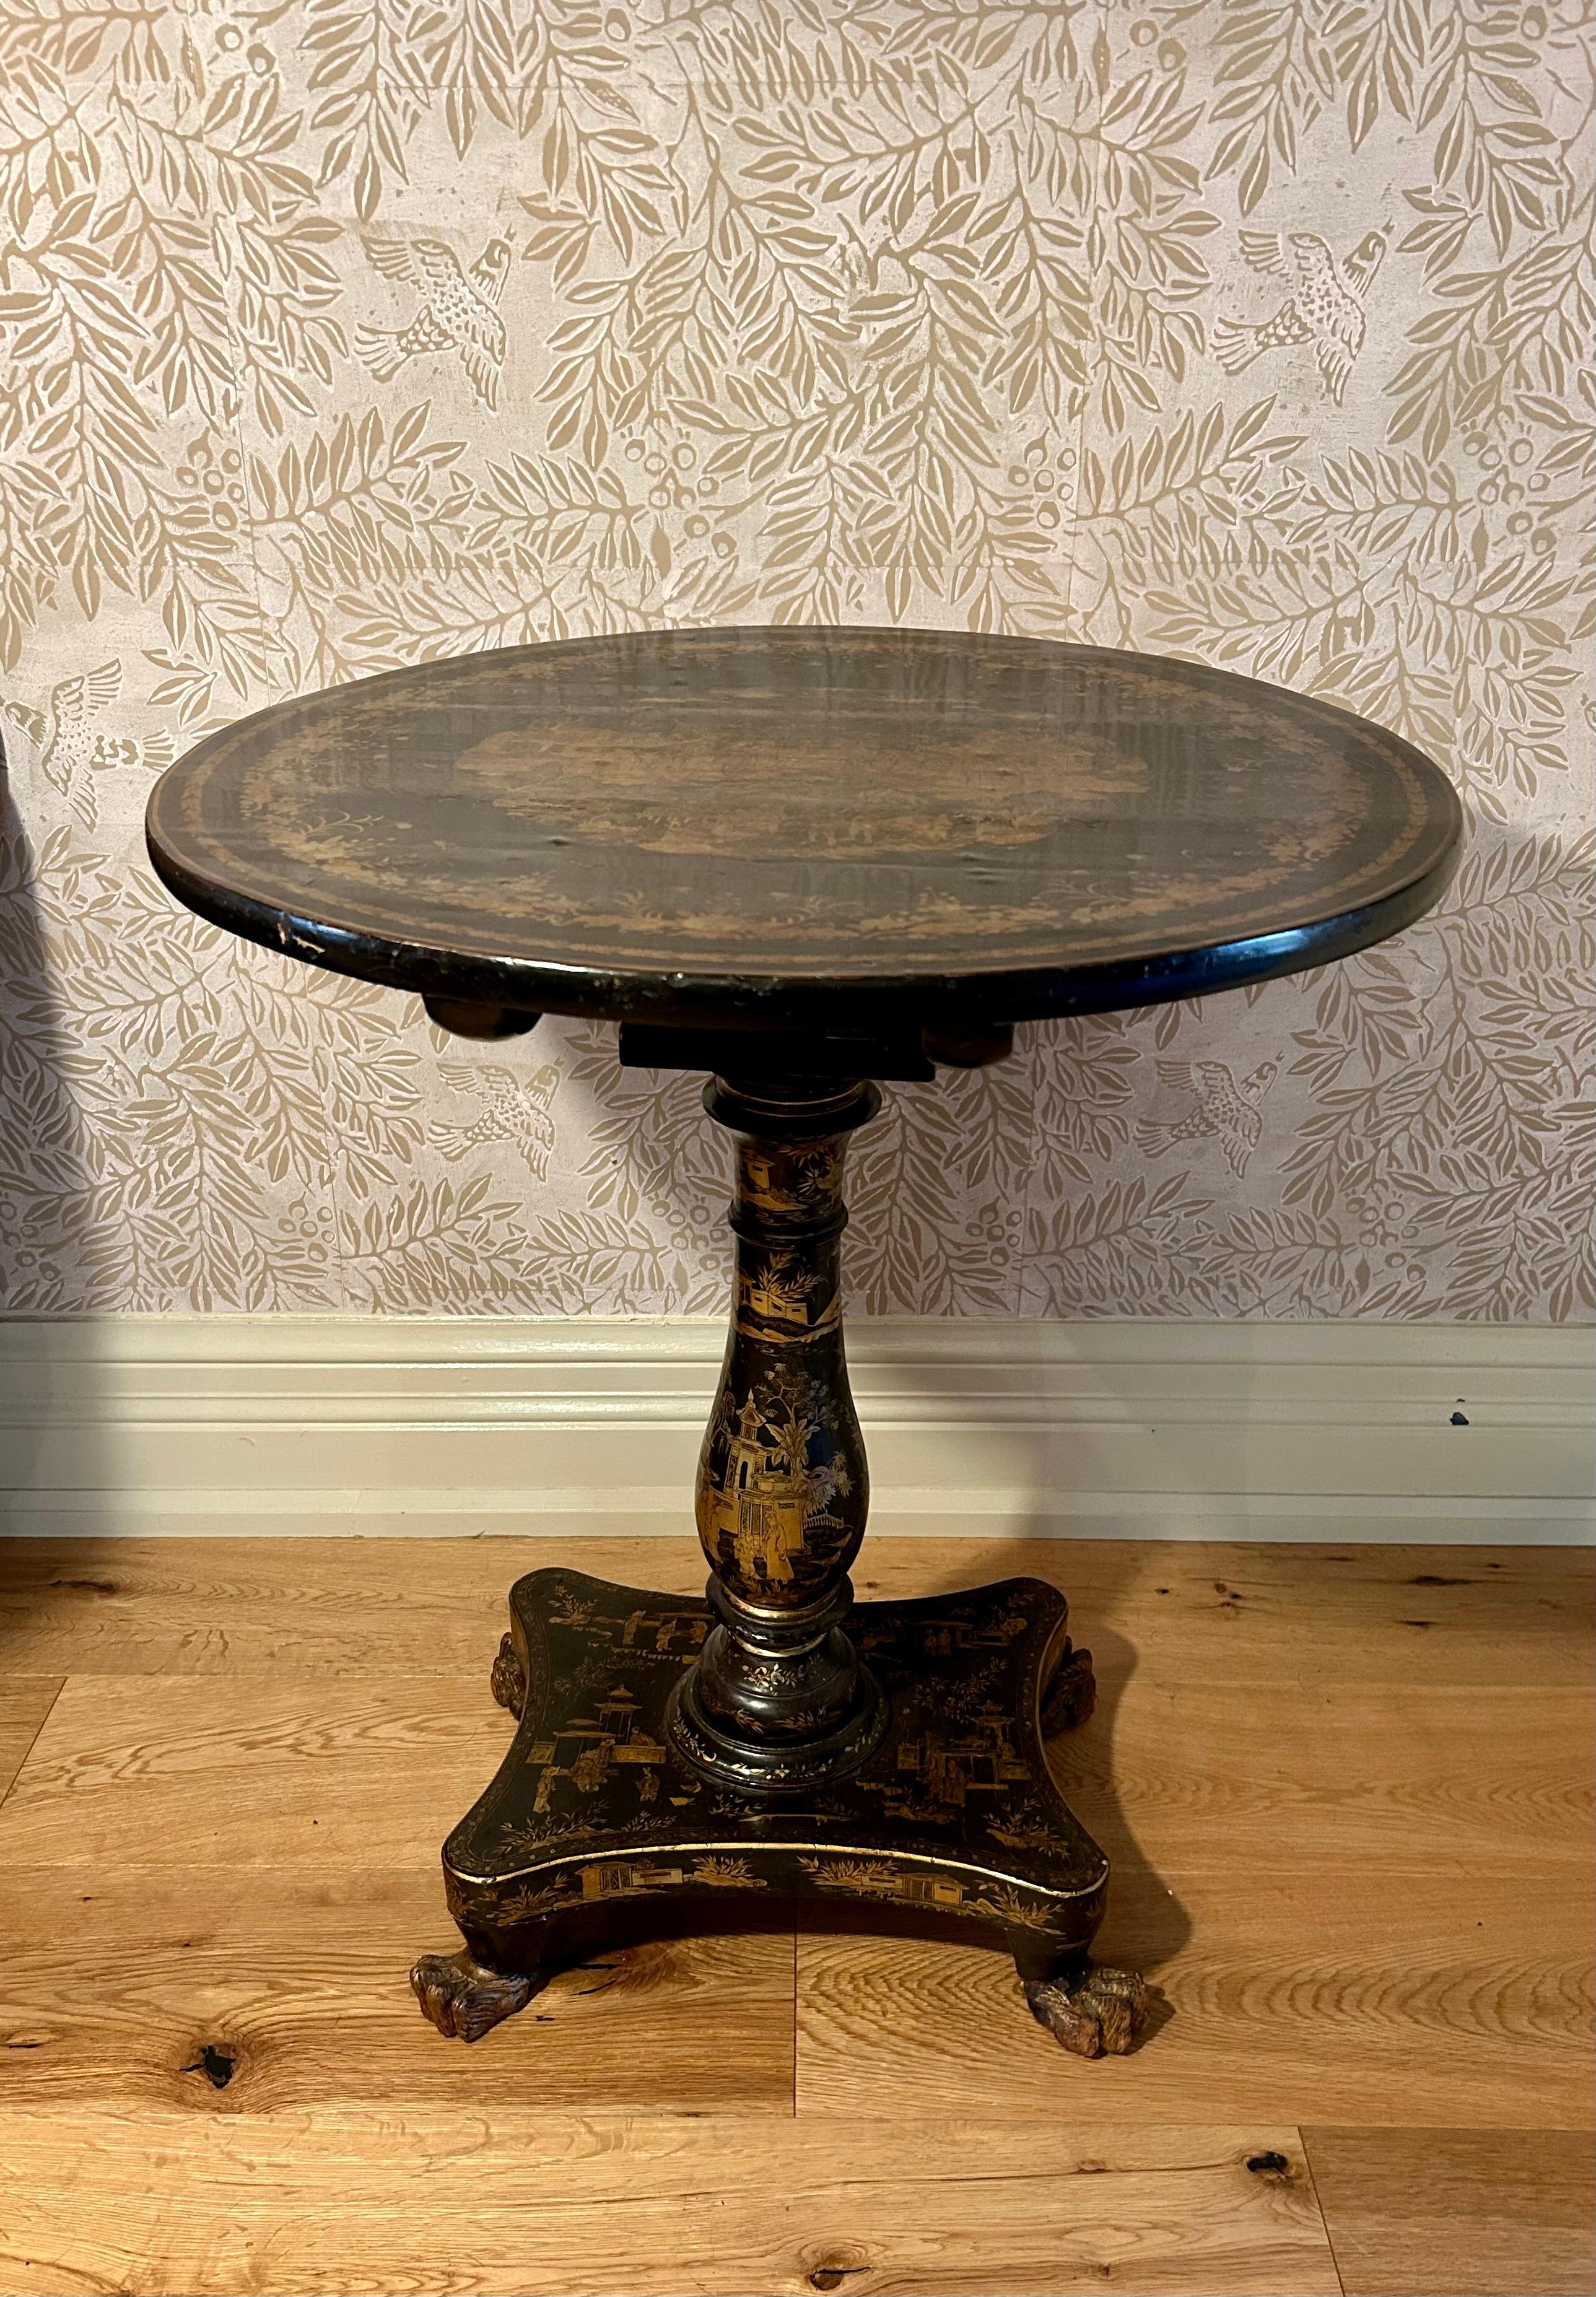 This is an exquisite Chinese export tilt-top table with a quatrefoil base and four claw feet. The pedestal is in a baluster shape and the top is round. All in black lacquer with extremely fine gold chinoiserie designs throughout, depicting figures